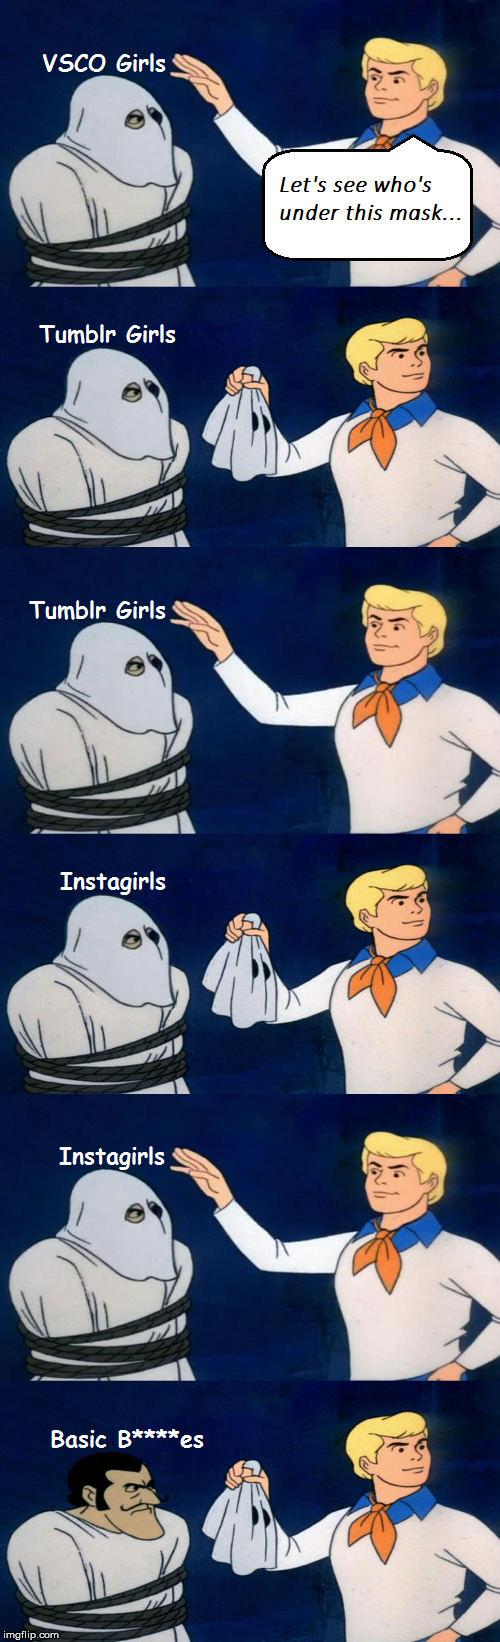 image tagged in tumblr,basic,scooby doo,ghost,mask,scooby doo the ghost | made w/ Imgflip meme maker